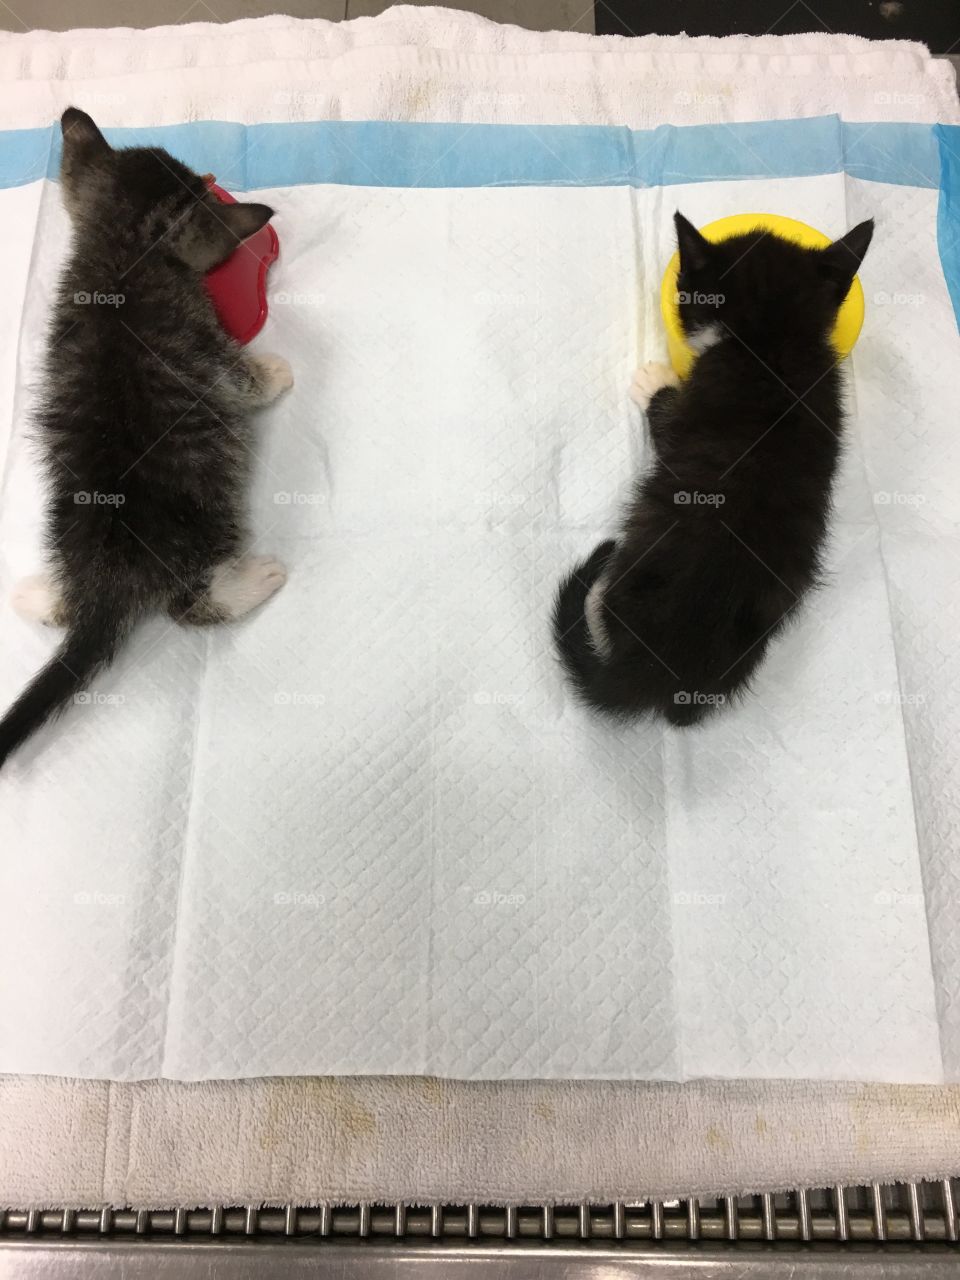 Just learning to eat on their own